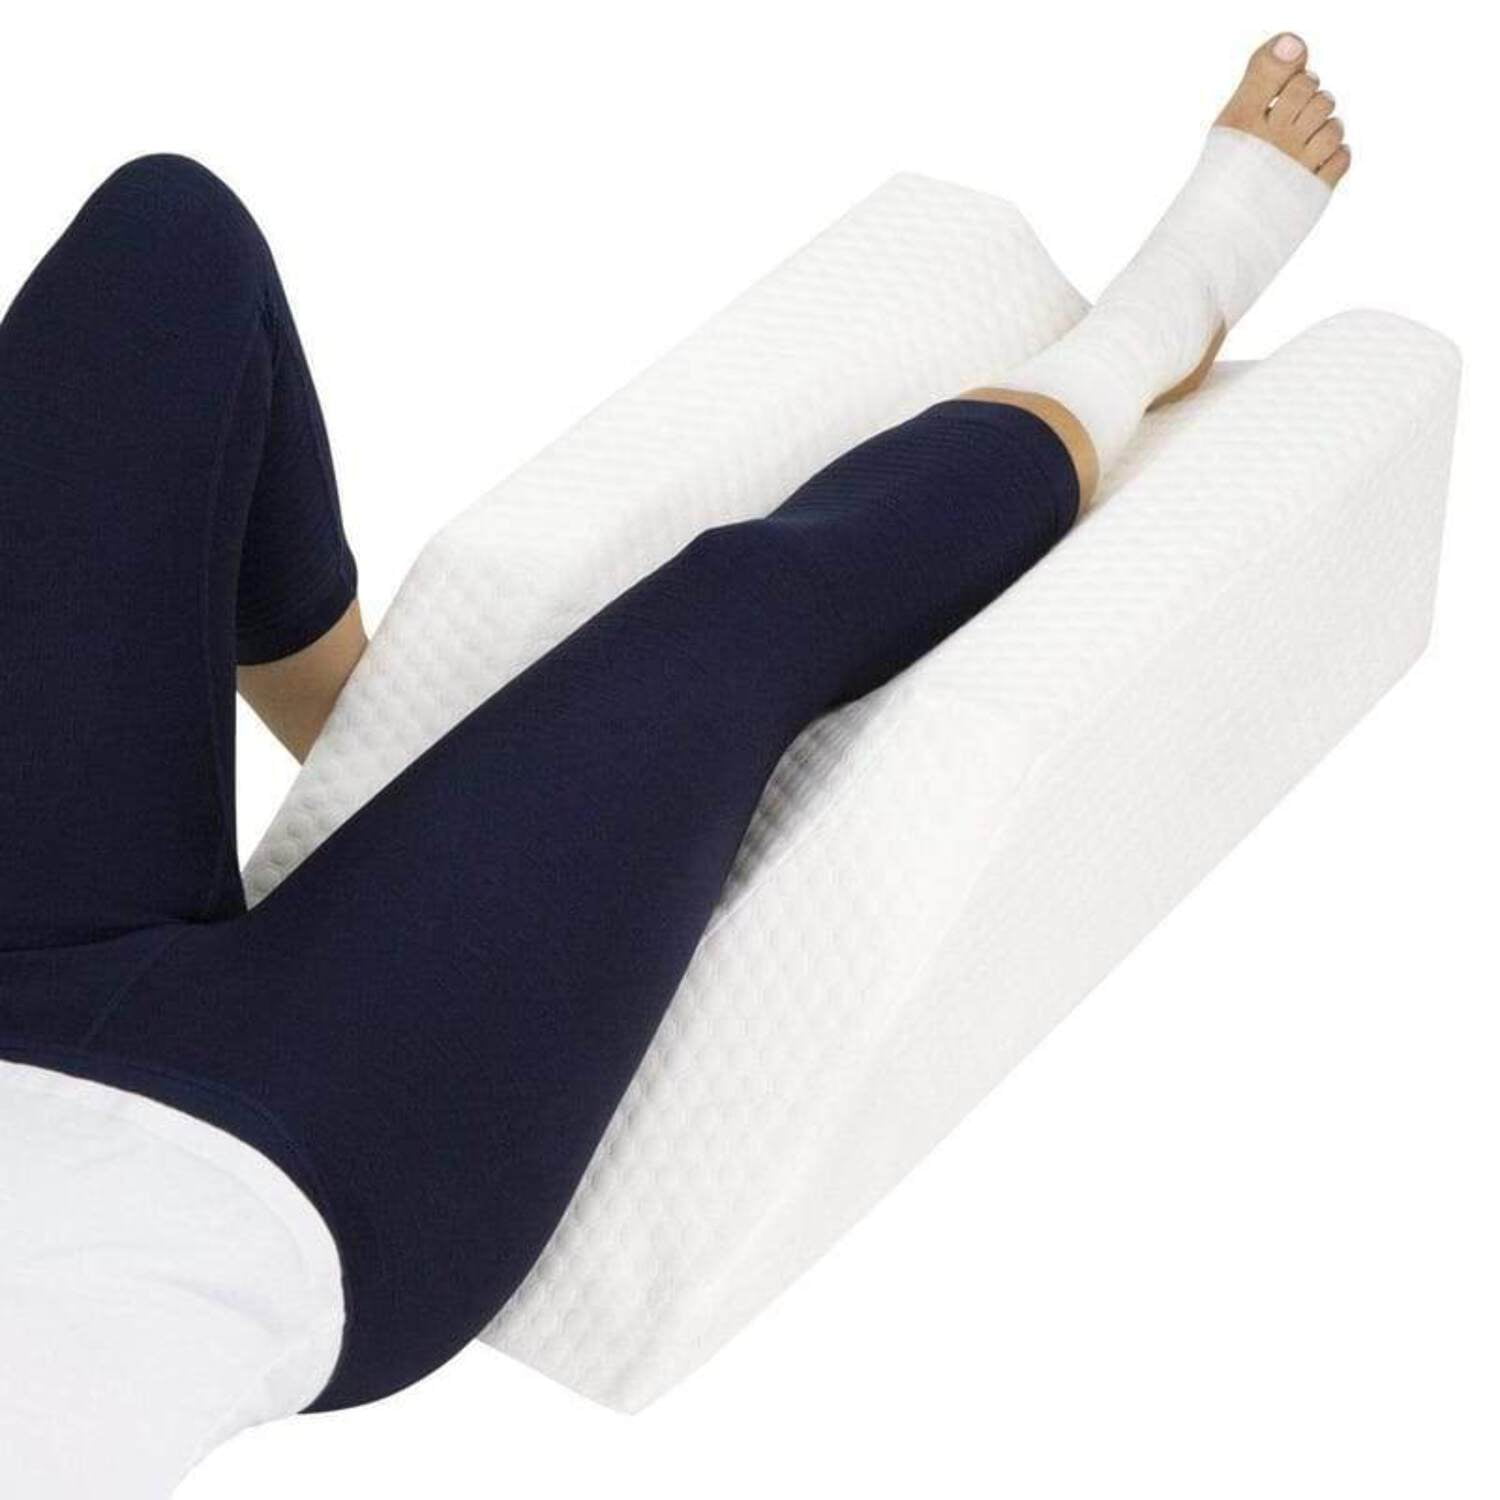 High Density Foam Leg Cushion for Leg Rise, Comfort - Legs, Knee, Ankle  Support and Raise Pillow, Surgery, Injuries, Rest